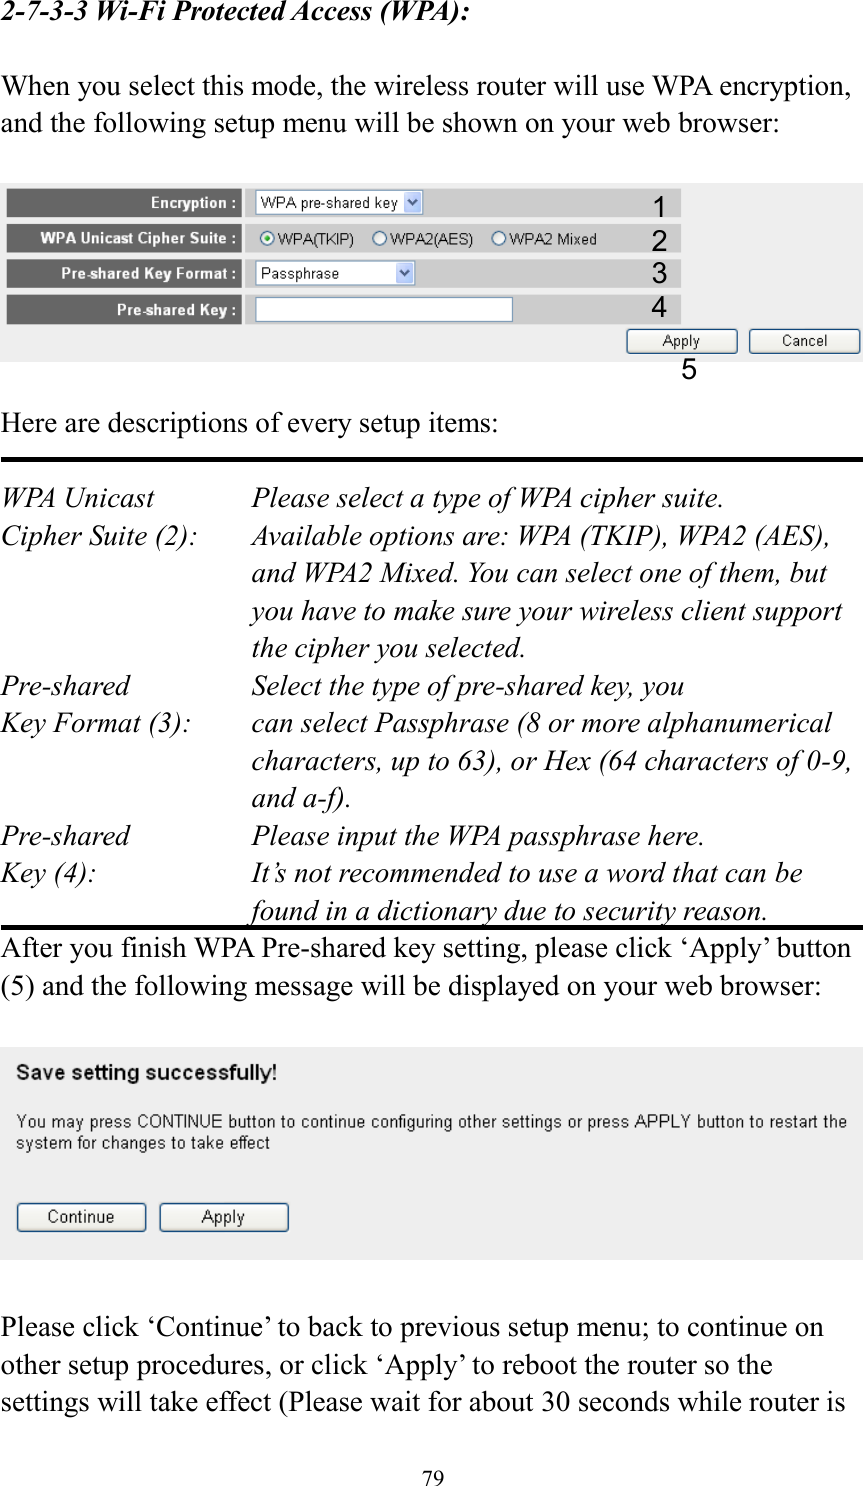 79 2-7-3-3 Wi-Fi Protected Access (WPA):  When you select this mode, the wireless router will use WPA encryption, and the following setup menu will be shown on your web browser:    Here are descriptions of every setup items:  WPA Unicast      Please select a type of WPA cipher suite. Cipher Suite (2):  Available options are: WPA (TKIP), WPA2 (AES), and WPA2 Mixed. You can select one of them, but you have to make sure your wireless client support the cipher you selected. Pre-shared       Select the type of pre-shared key, you Key Format (3):    can select Passphrase (8 or more alphanumerical characters, up to 63), or Hex (64 characters of 0-9, and a-f). Pre-shared       Please input the WPA passphrase here. Key (4):    It’s not recommended to use a word that can be found in a dictionary due to security reason. After you finish WPA Pre-shared key setting, please click ‘Apply’ button (5) and the following message will be displayed on your web browser:    Please click ‘Continue’ to back to previous setup menu; to continue on other setup procedures, or click ‘Apply’ to reboot the router so the settings will take effect (Please wait for about 30 seconds while router is 1 2 3 5 4 